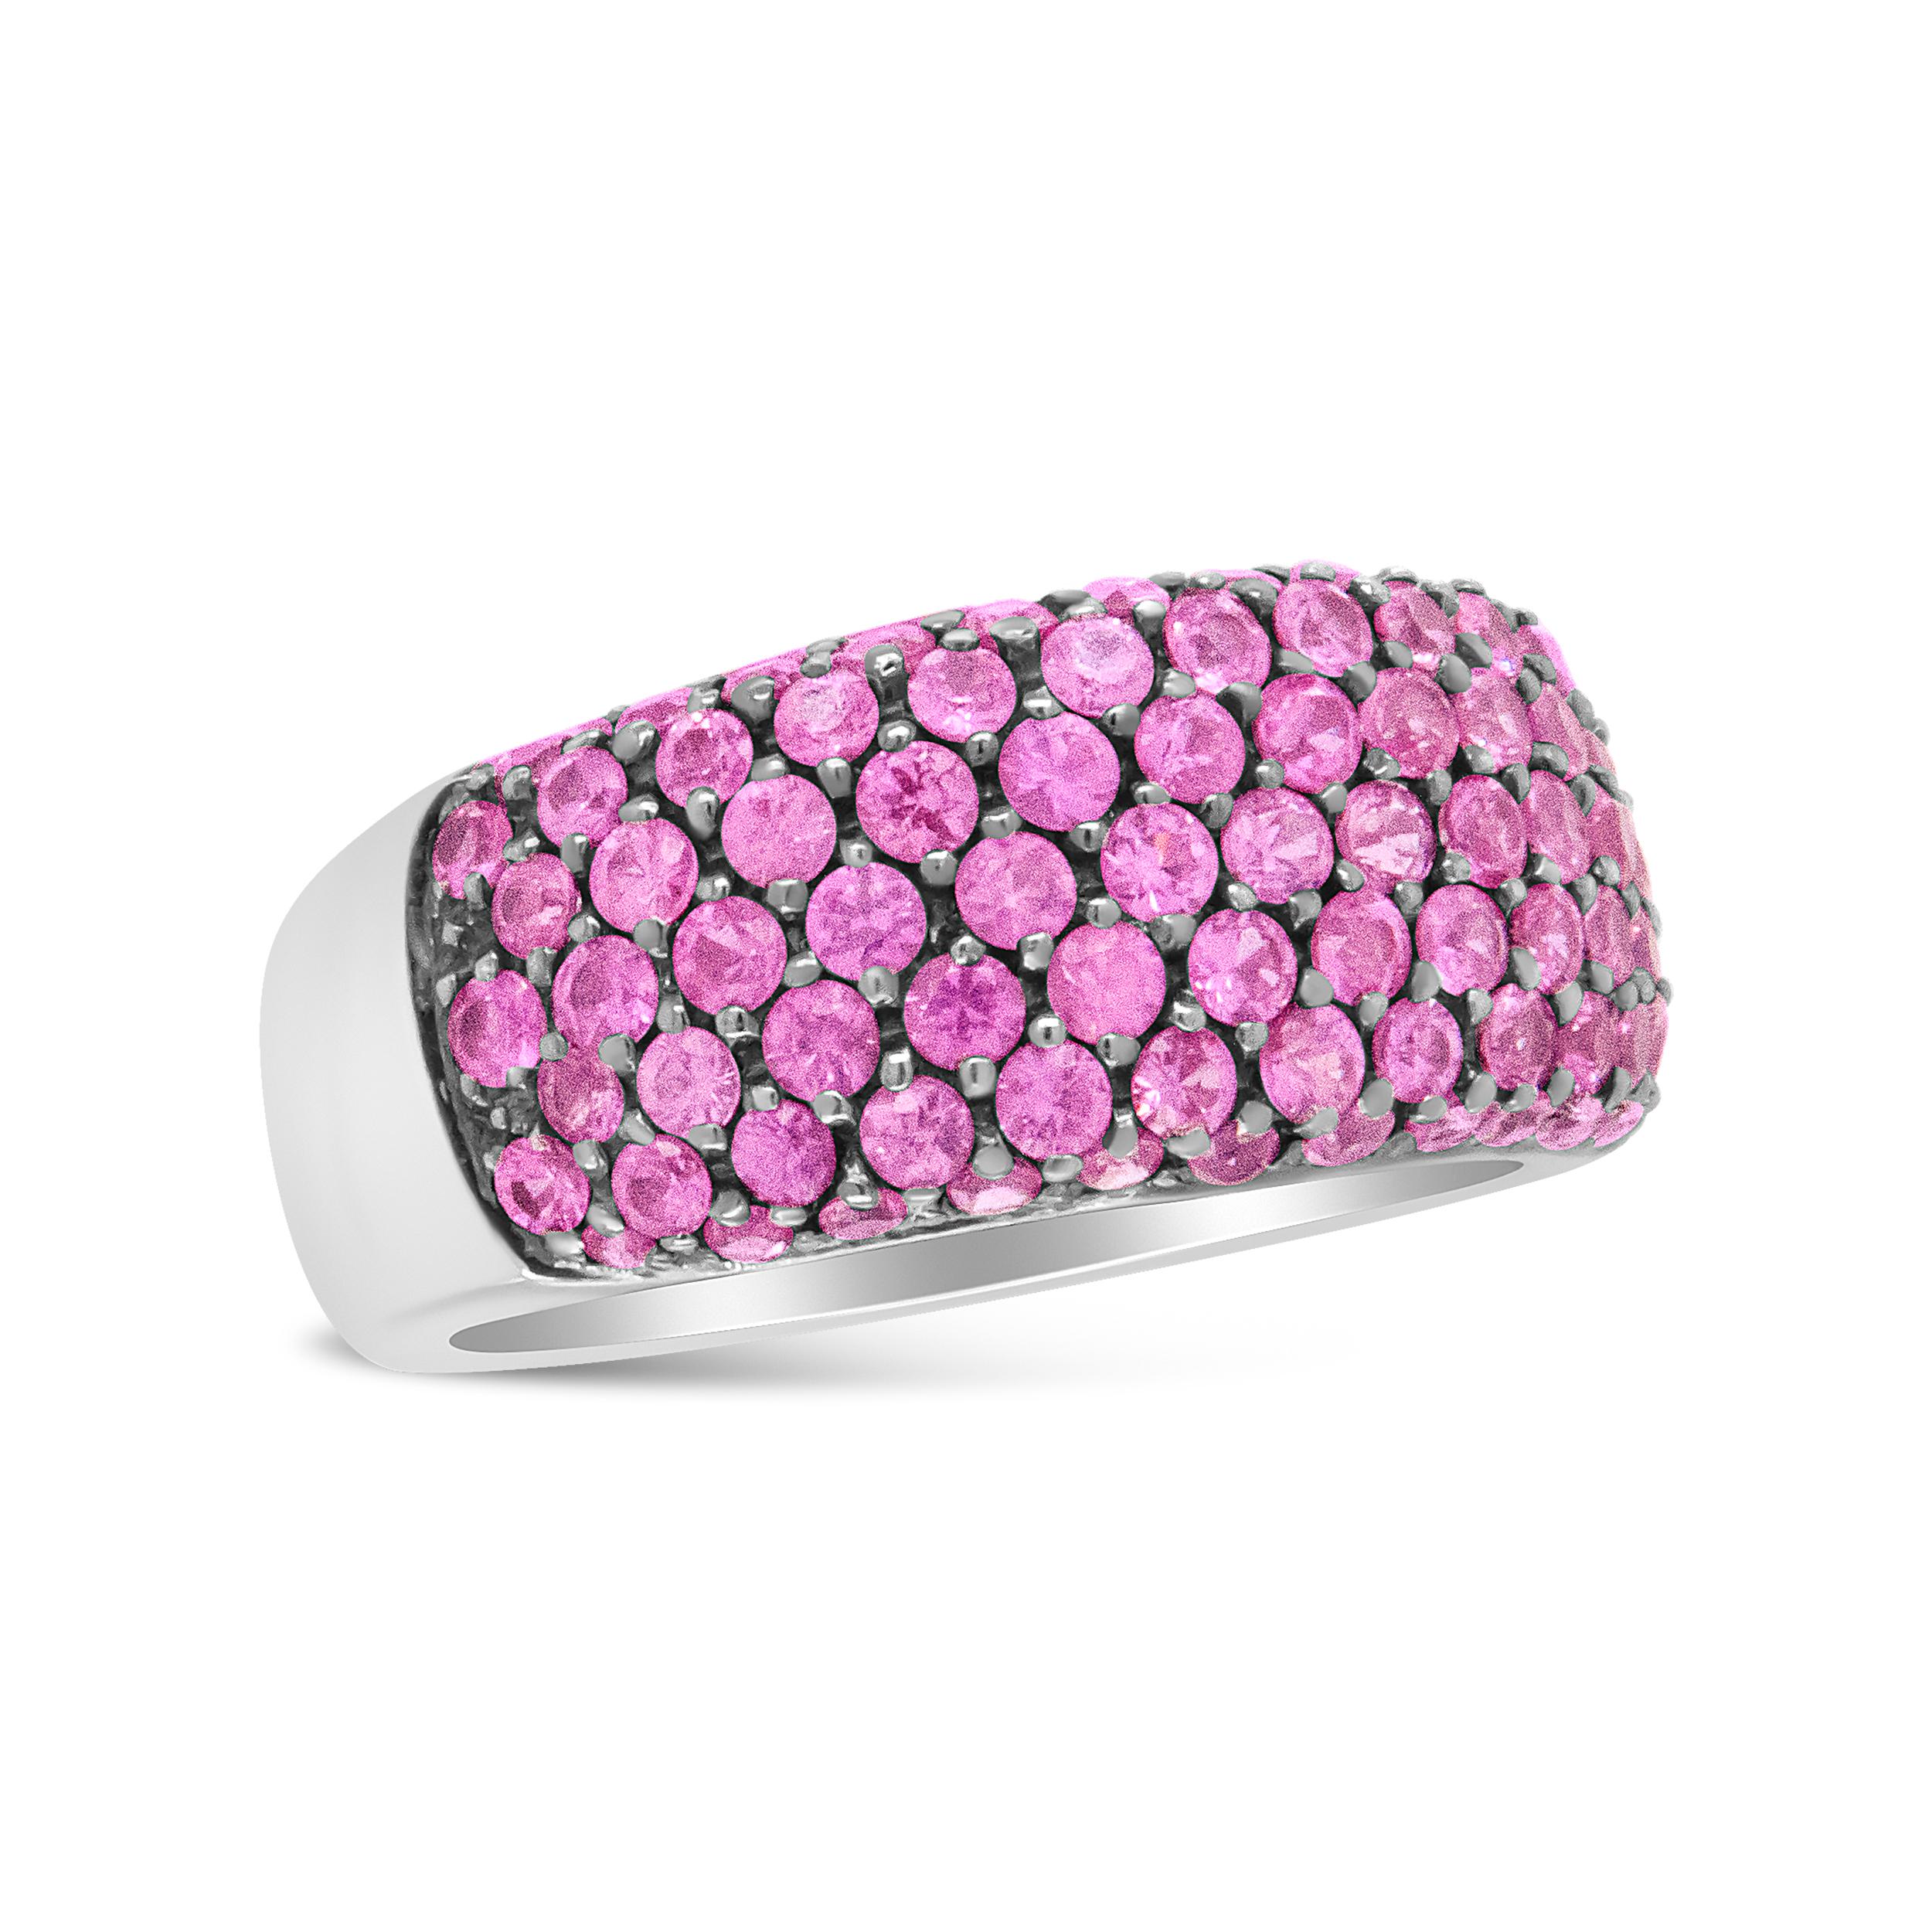 A unique upgrade to a classic diamond band is this beautiful white gold ring set with pink sapphires. The sapphires are striking against the luxurious 18k white gold band, with a beaded gold design interloping the stones. Elevate your jewelry